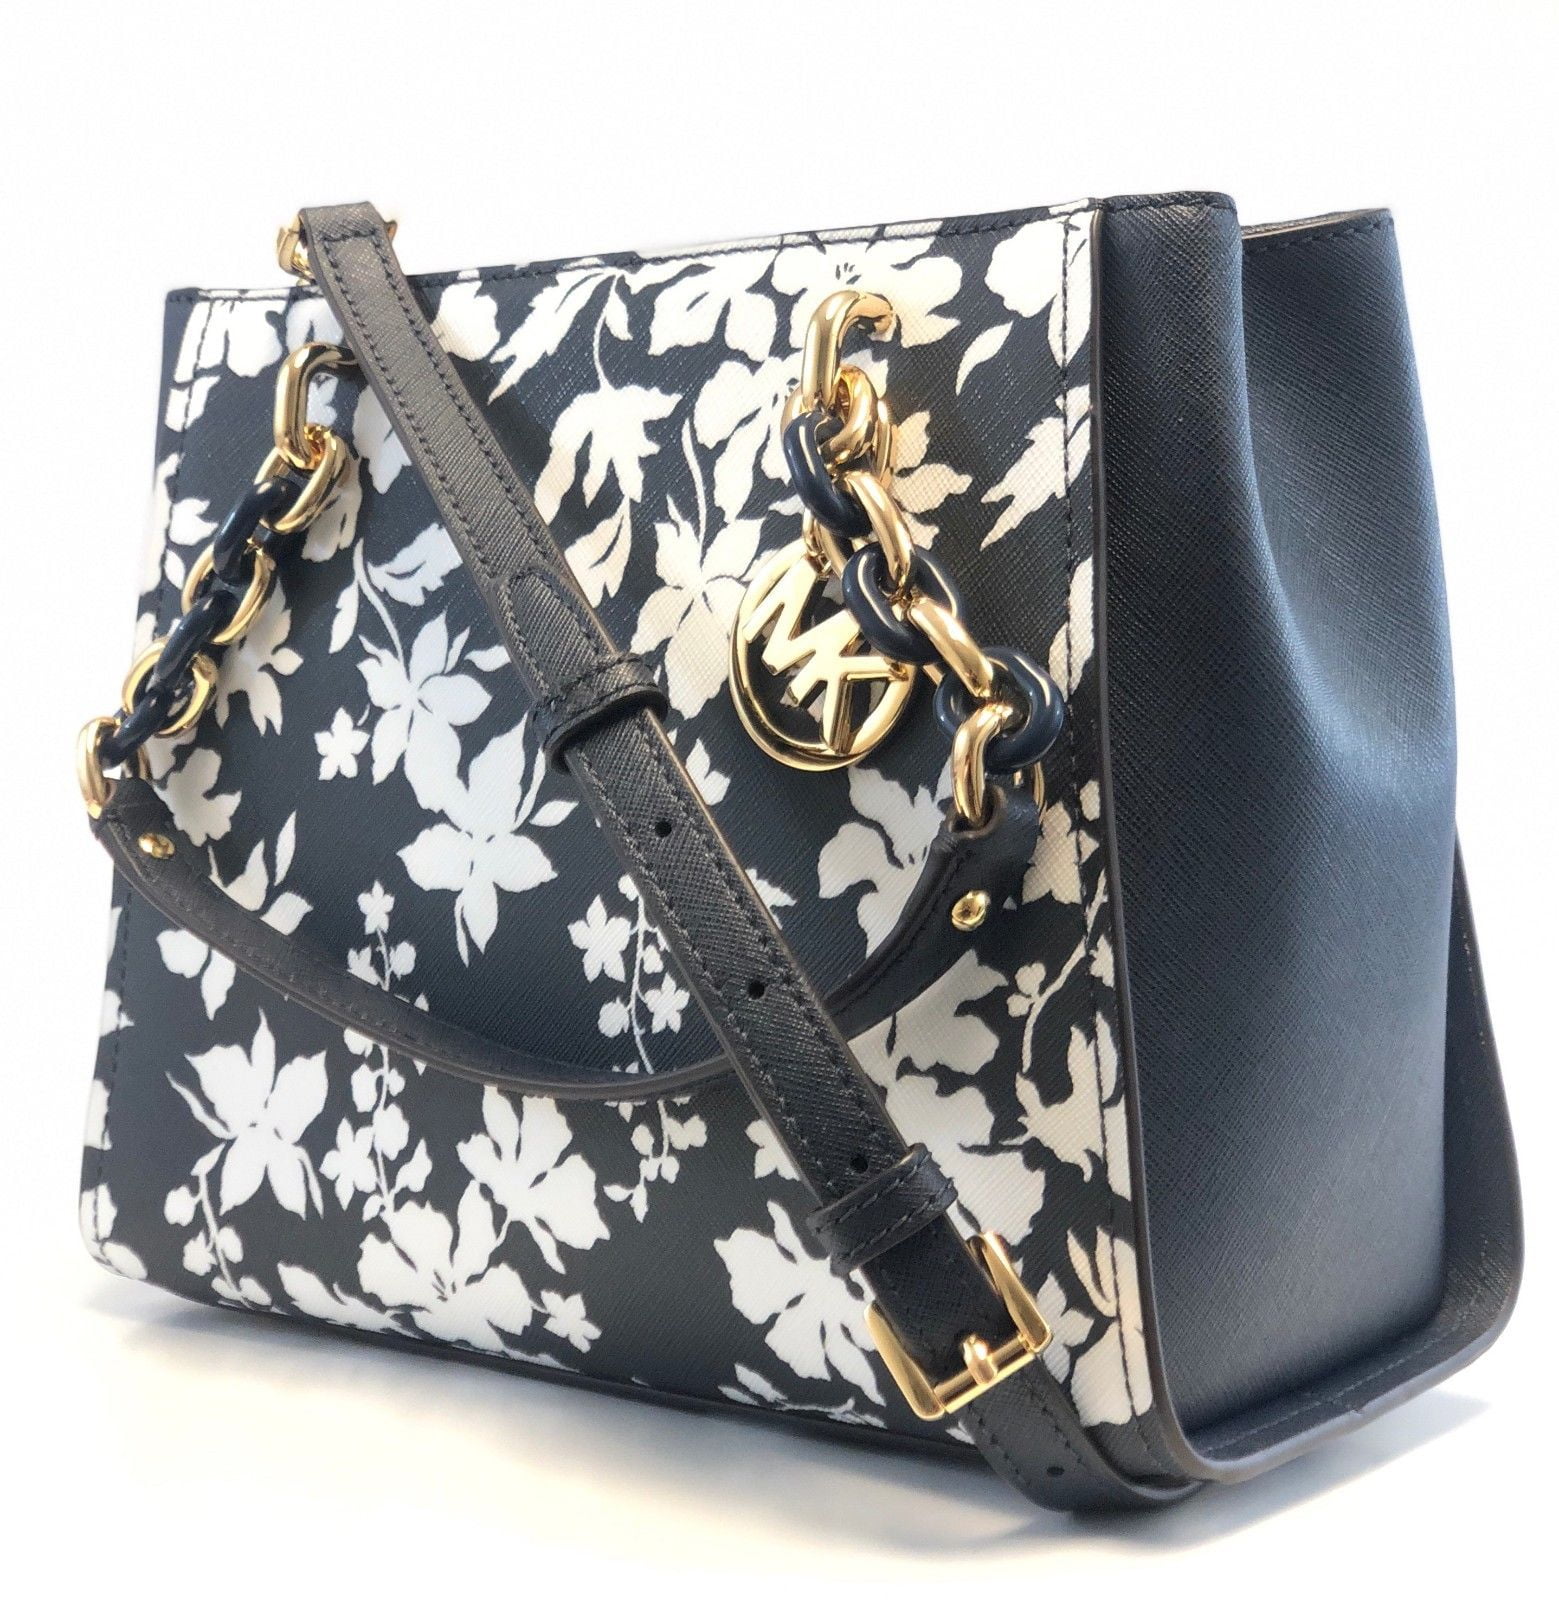 NEW WOMENS MICHAEL KORS SOFIA MEDIUM NORTH SOUTH NAVY FLORAL CHAIN TOTE ...